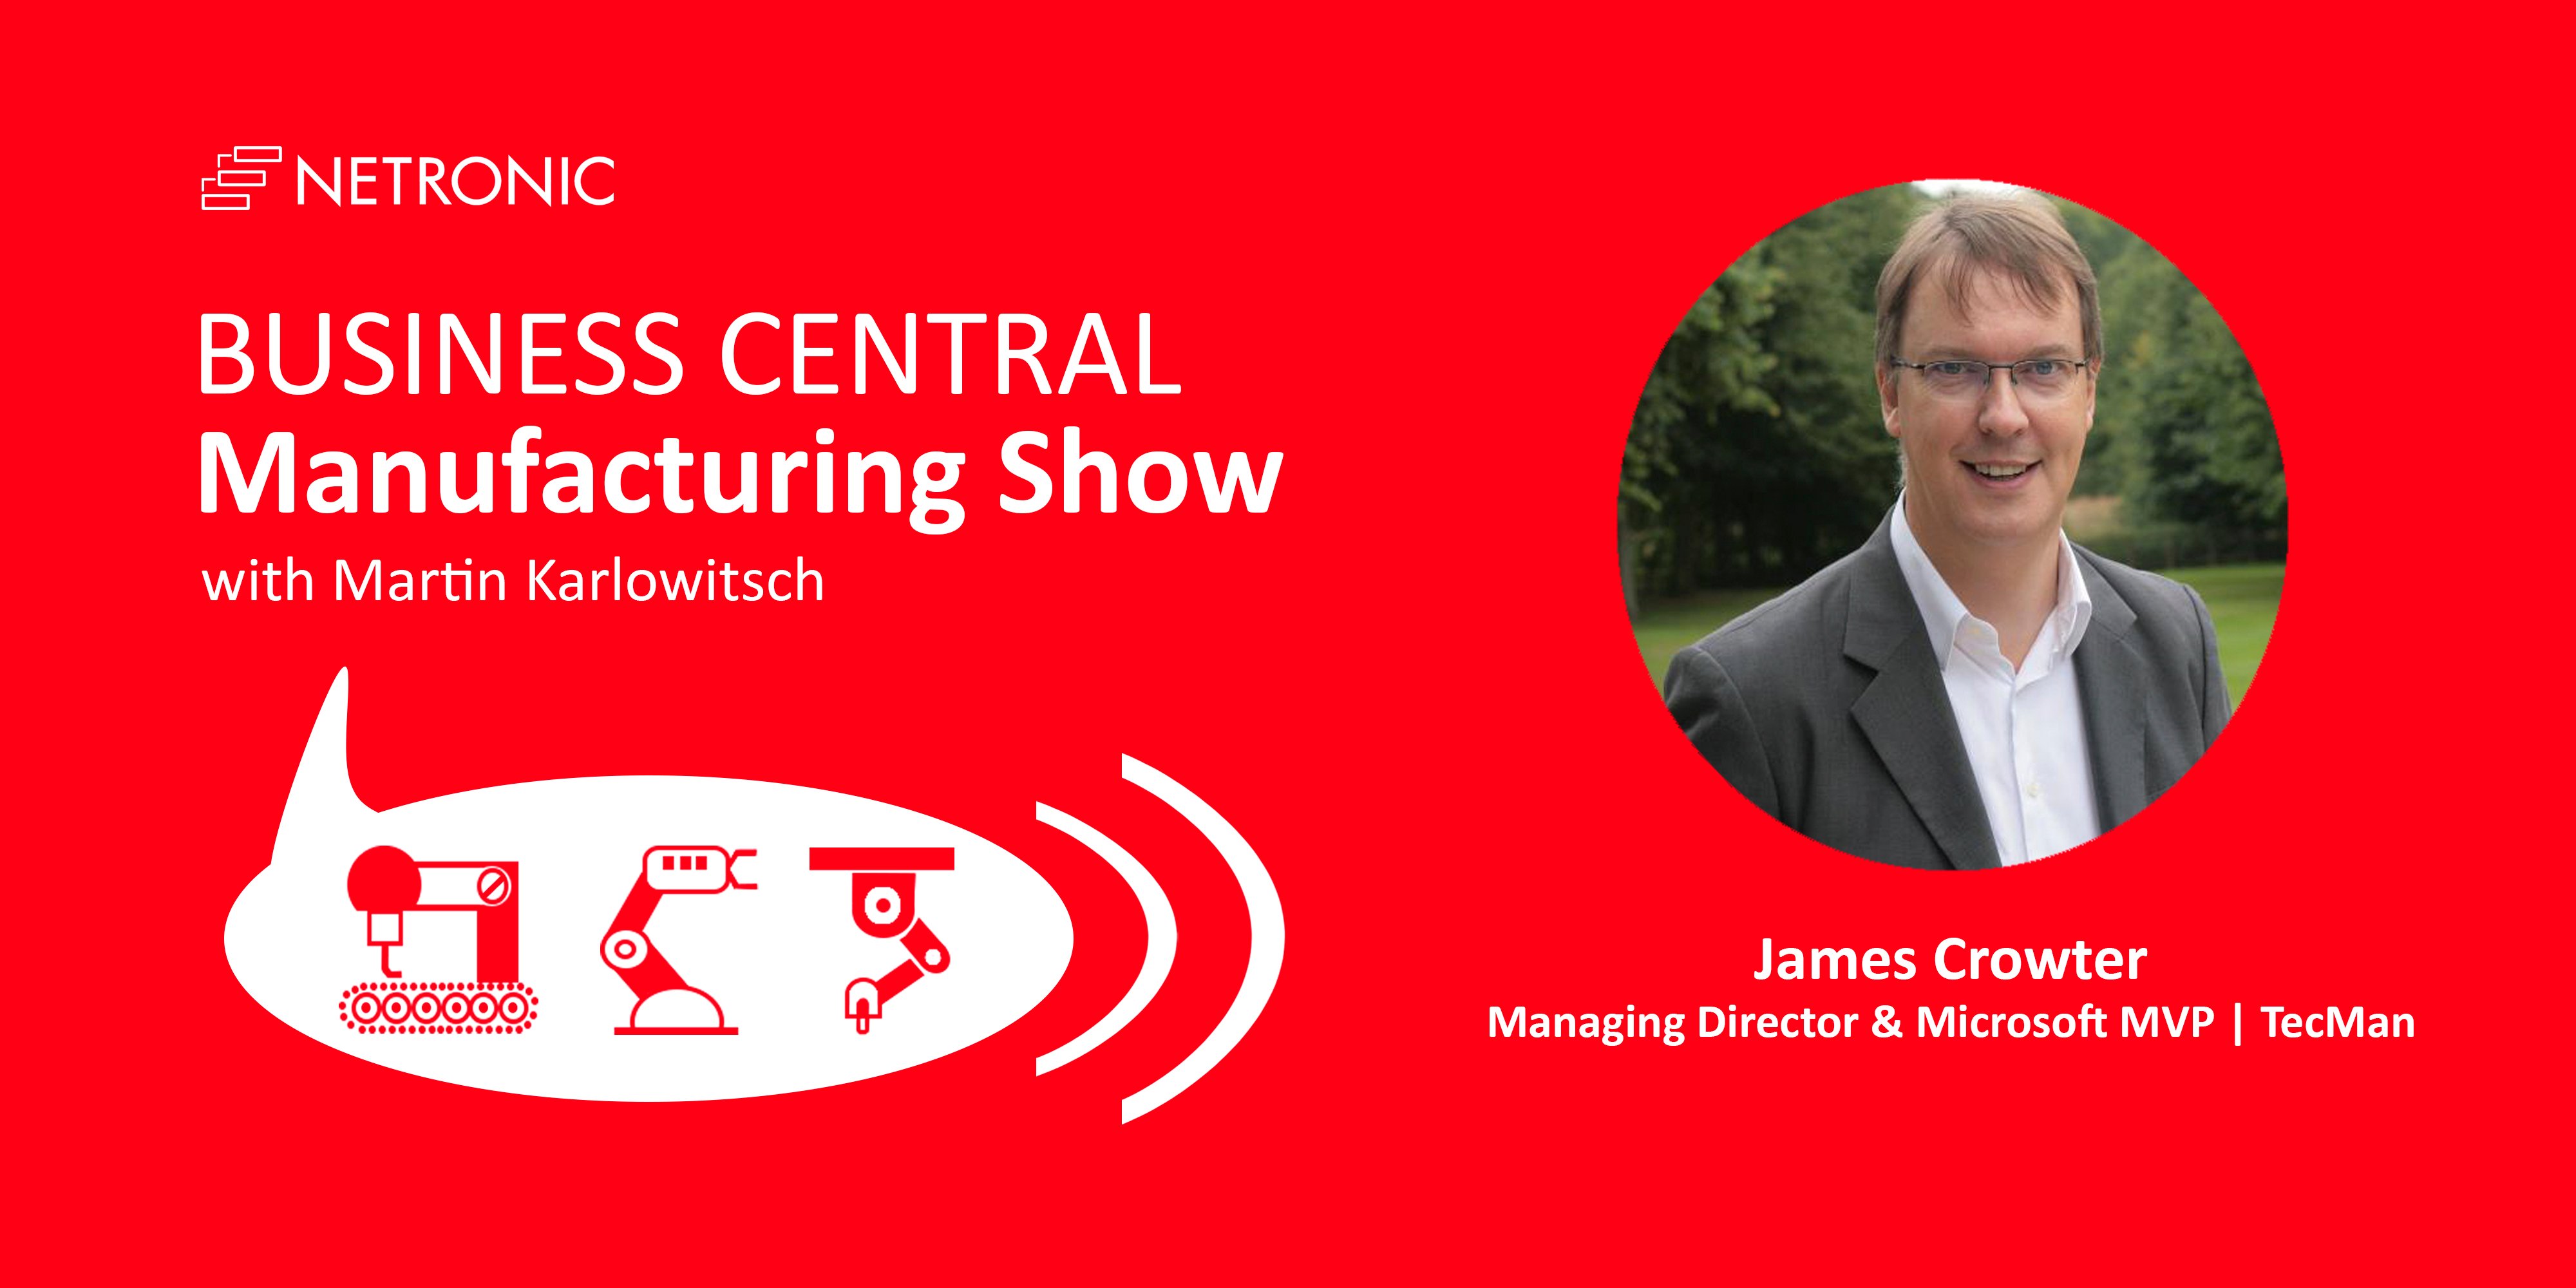 Business Central Manufacturing Show - James Crowter